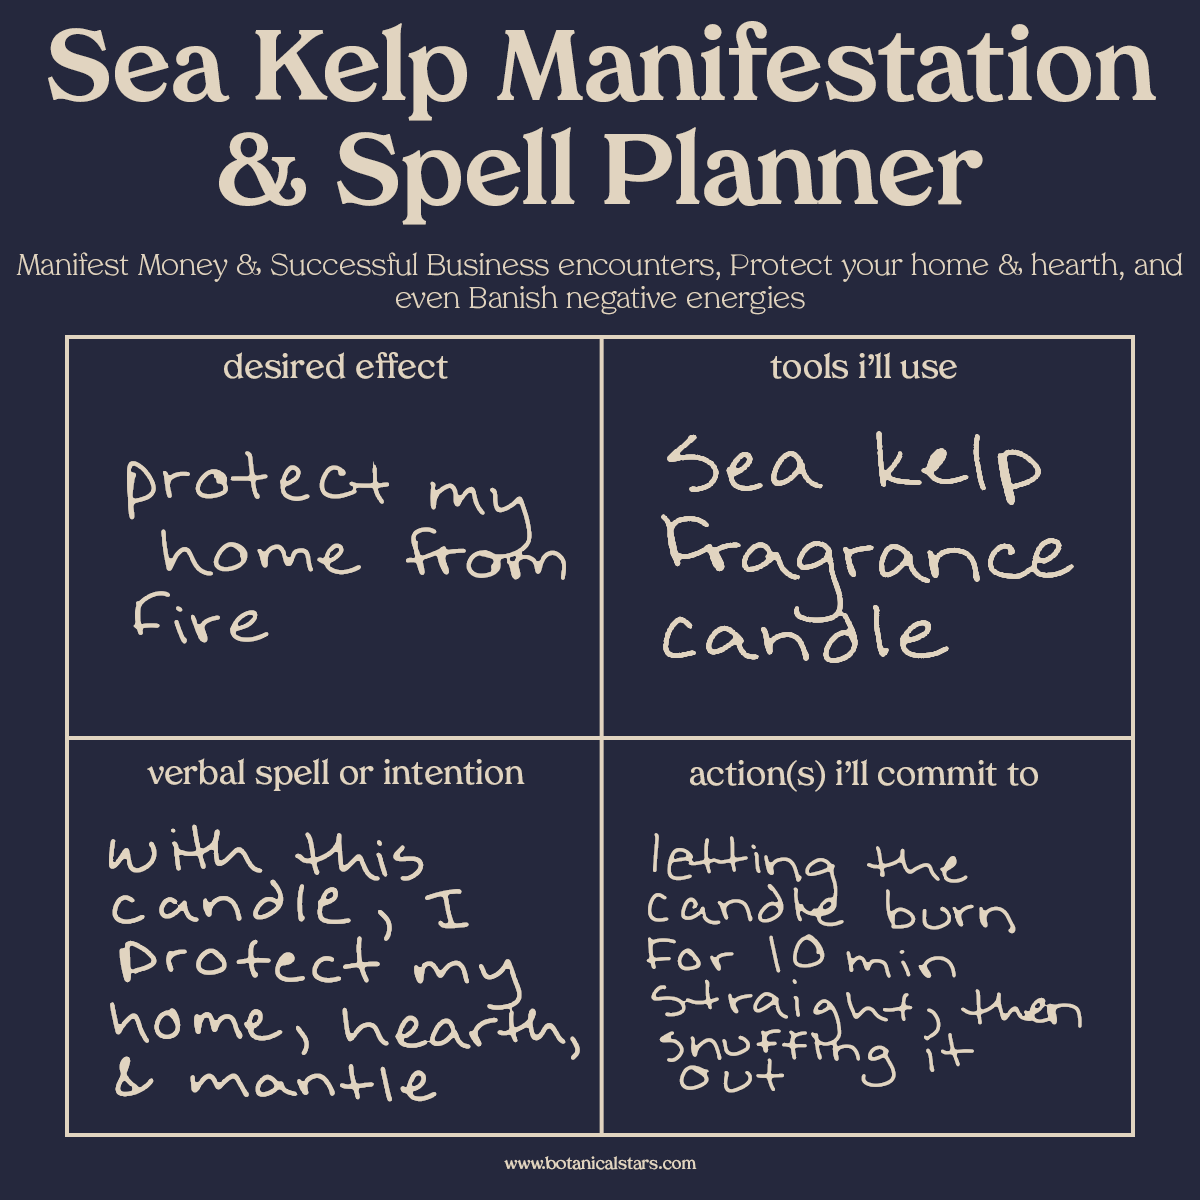 filled out spell planner guide for manifesting and spell casting with sea kelp or bladderwack